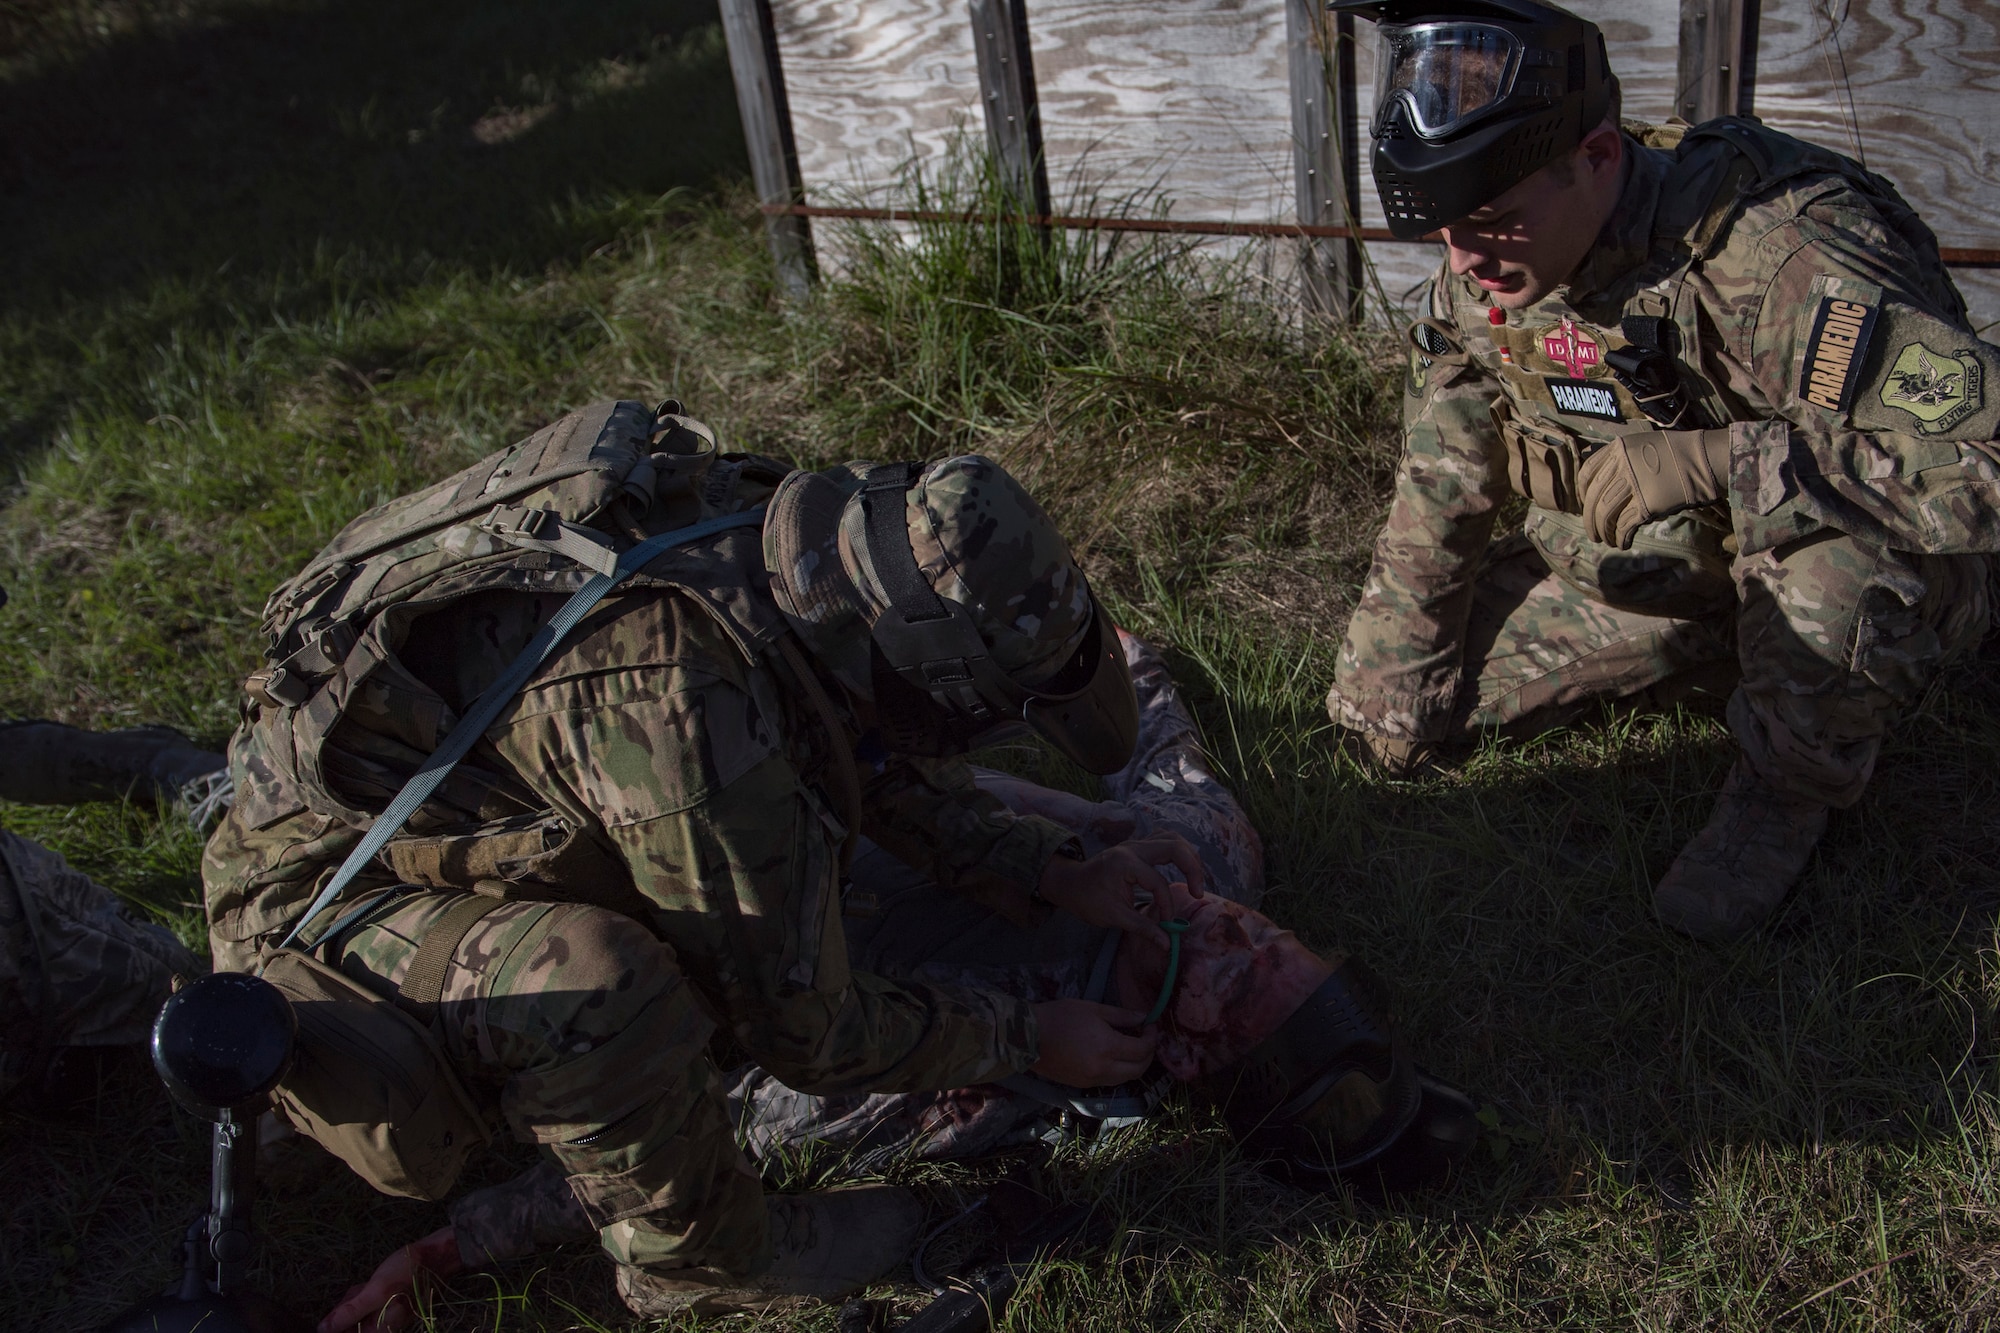 Staff Sgt. Cory Newby, 347th Operations Support Squadron Independent Duty Medical Technician paramedic, observes a student applying Tactical Combat Causality Care during training, at Moody Air Force Base, Ga., Oct. 25, 2017. The new, three-day combined training is designed to merge many smaller courses and seamlessly tie together skills that could be used in the event that Airmen become isolated during a mission. (U.S. Air Force photo by Senior Airman Daniel Snider)